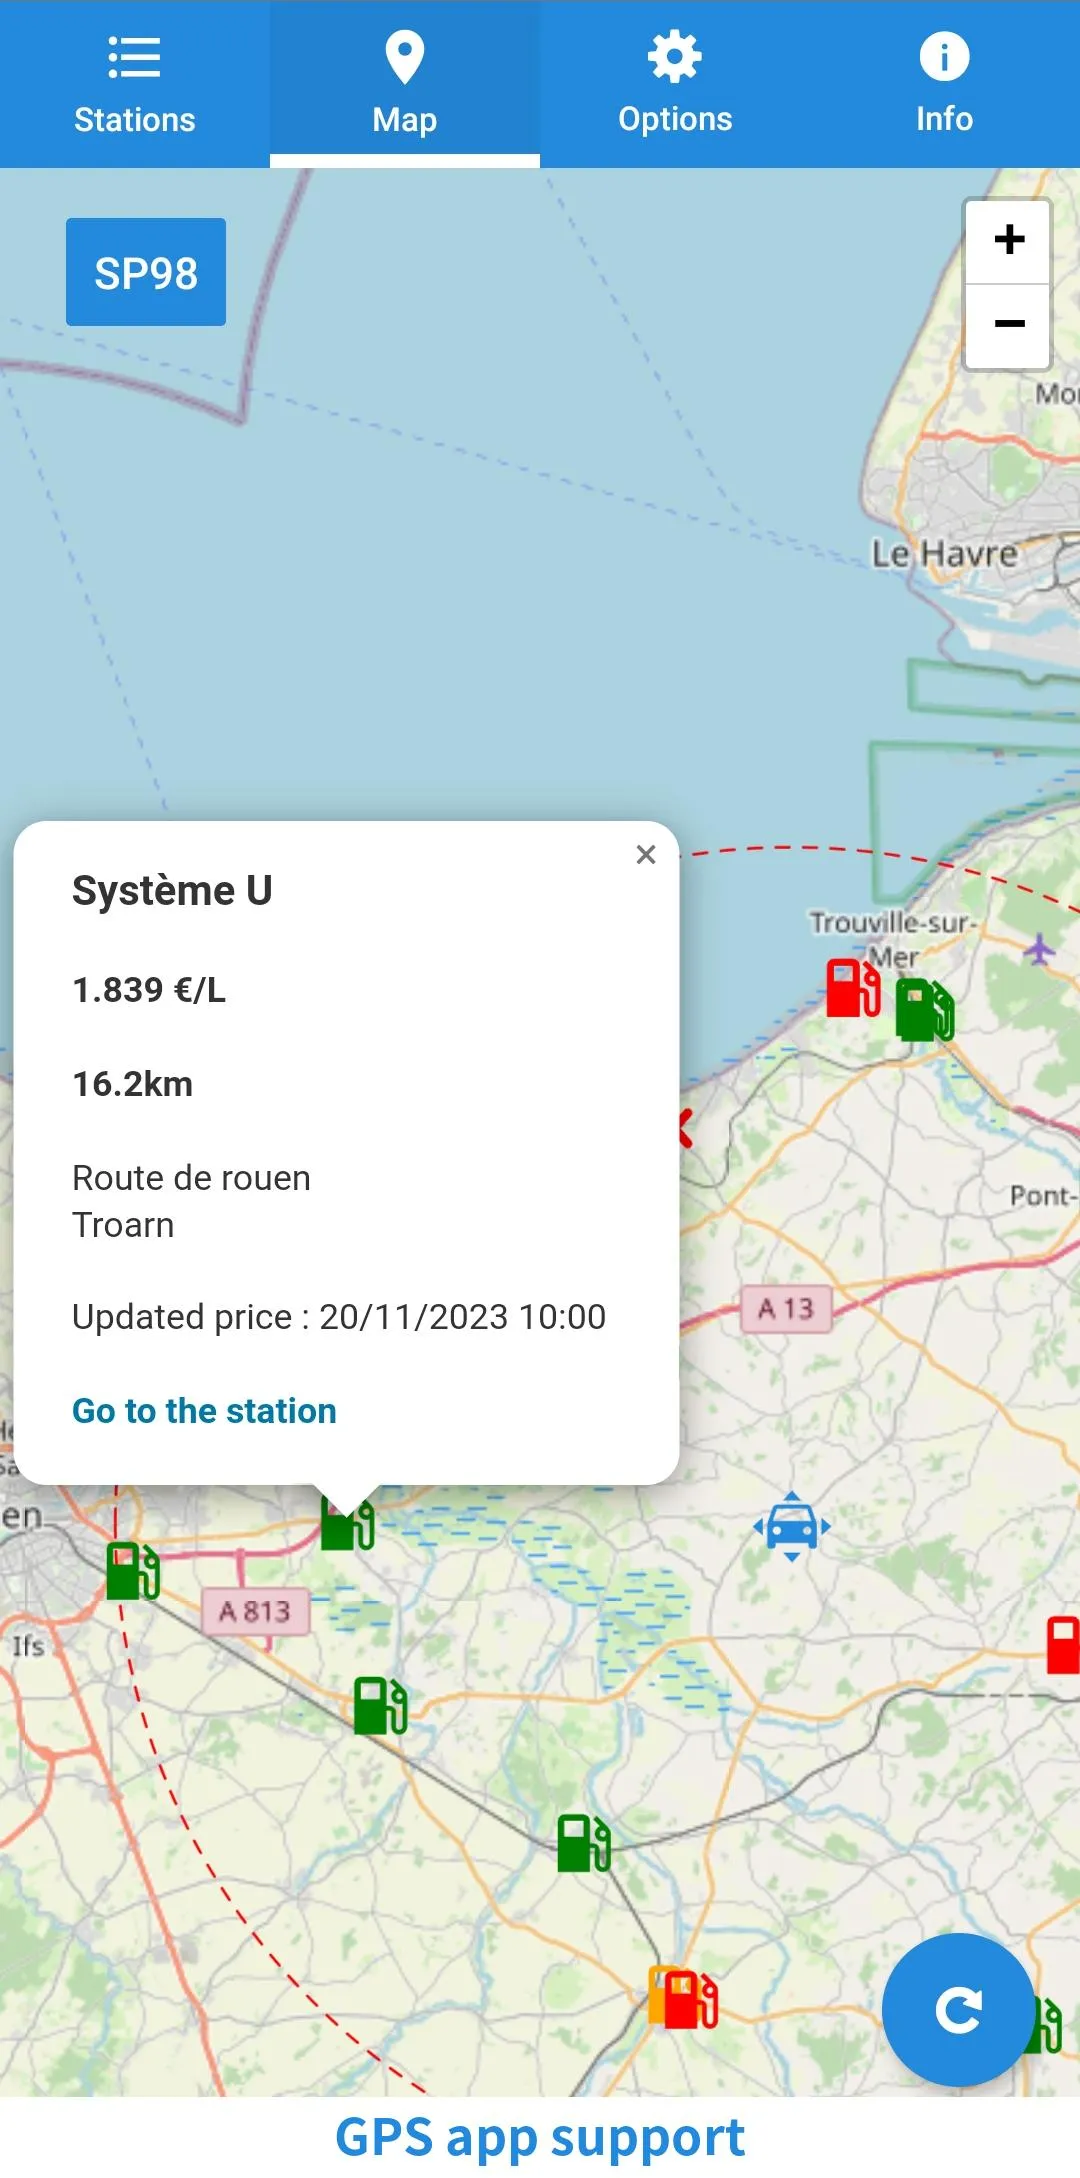 GPS app support